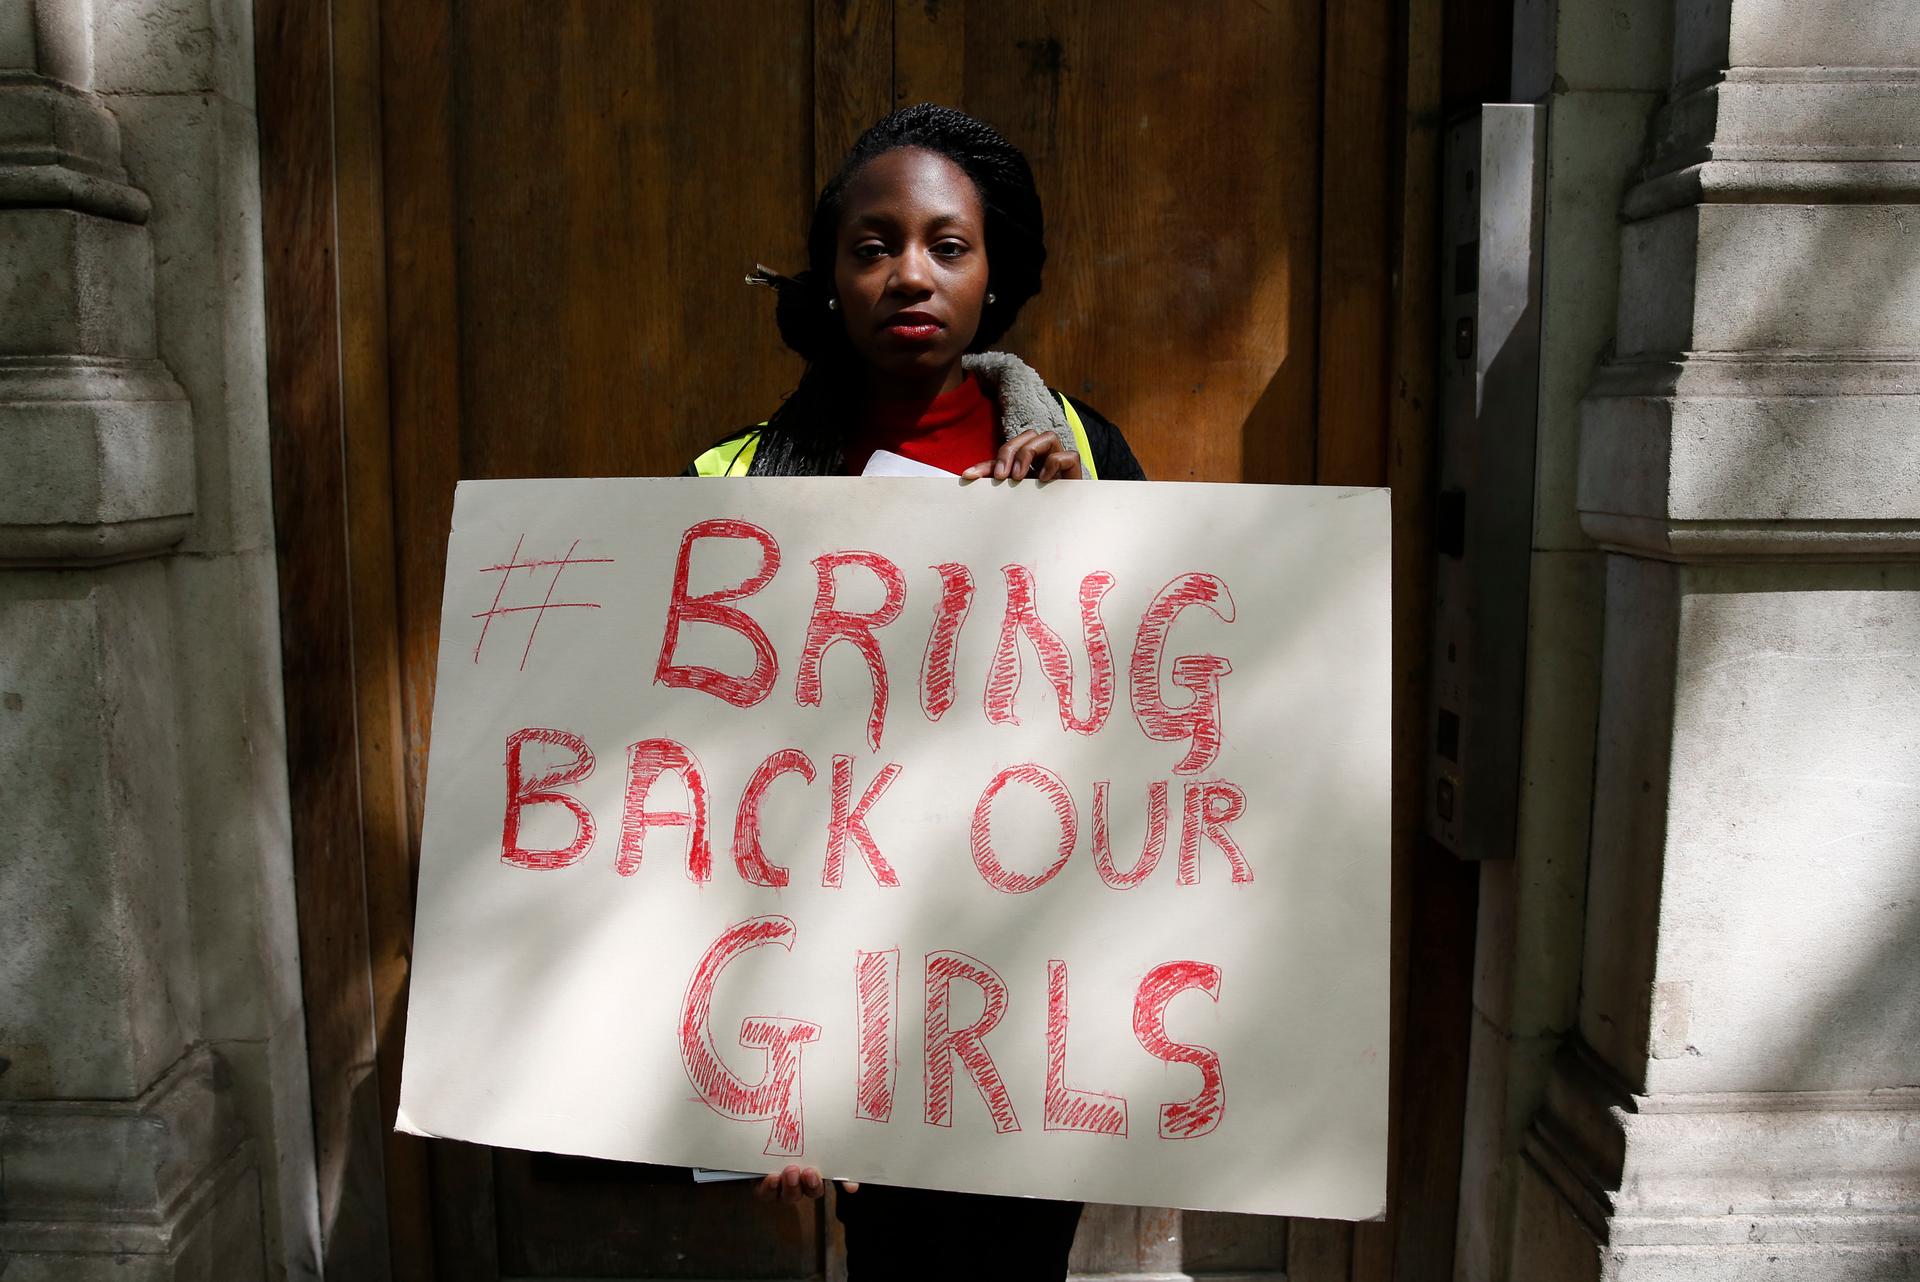 A protester outside the Nigerian Embassy in London holds a sign as she demonstrates against the kidnapping of school girls in Nigeria three weeks ago. There's been a world-wide outcry about the abductions carried about the Islamist militant group Boko Har